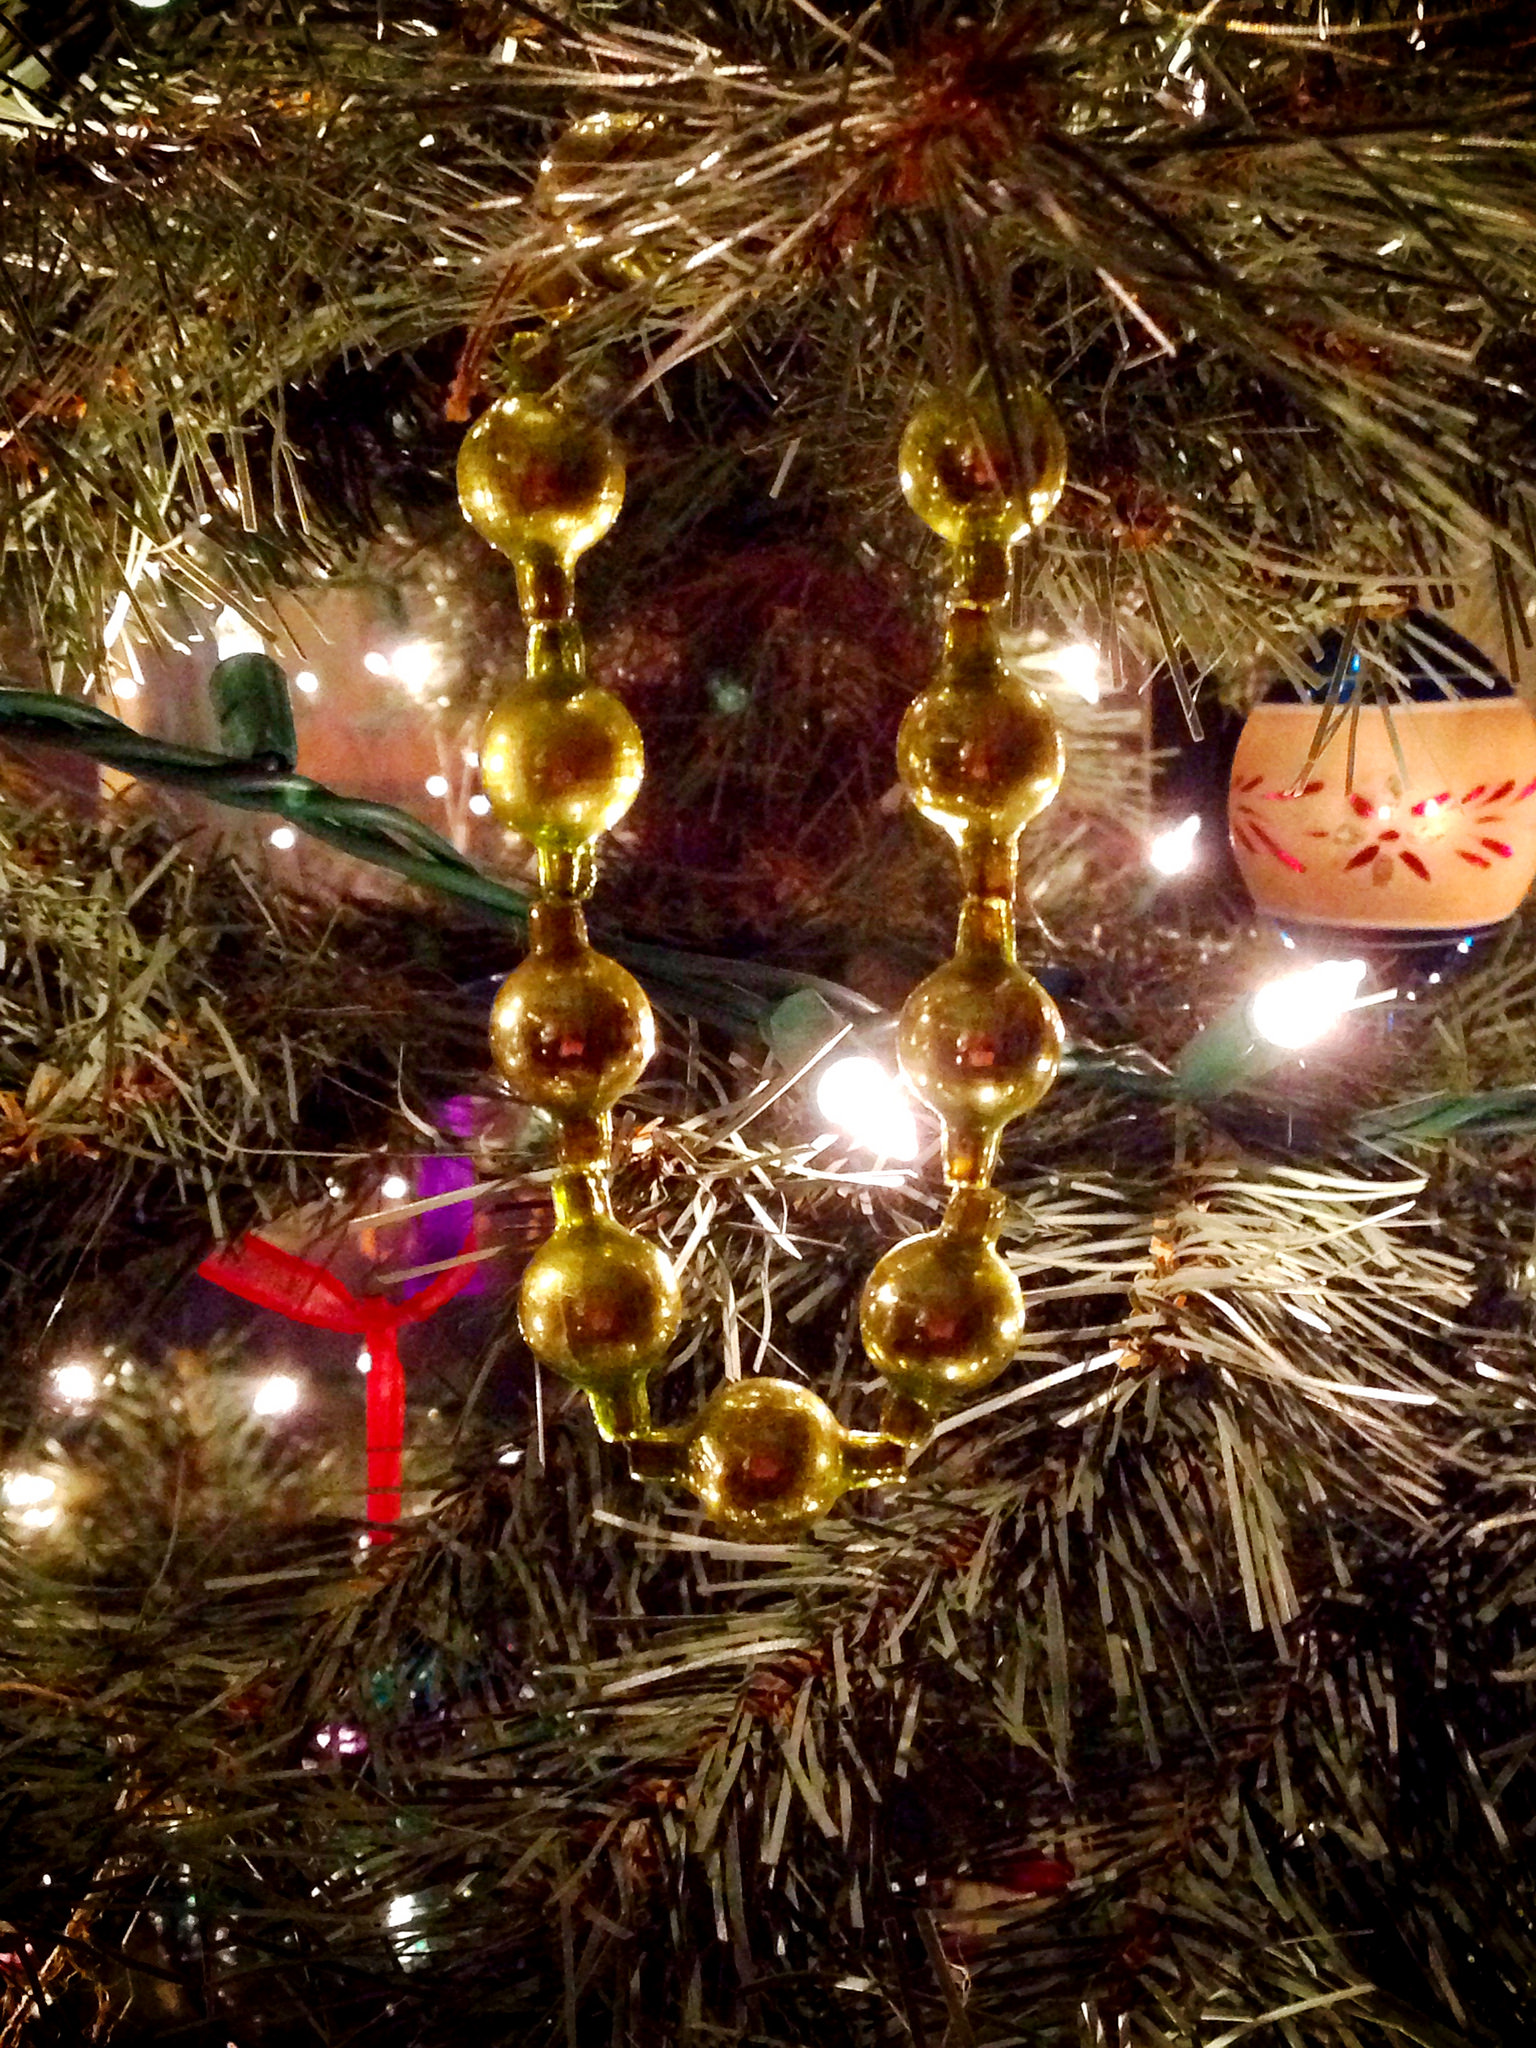 Day 1 of 16: Dad’s Ornament